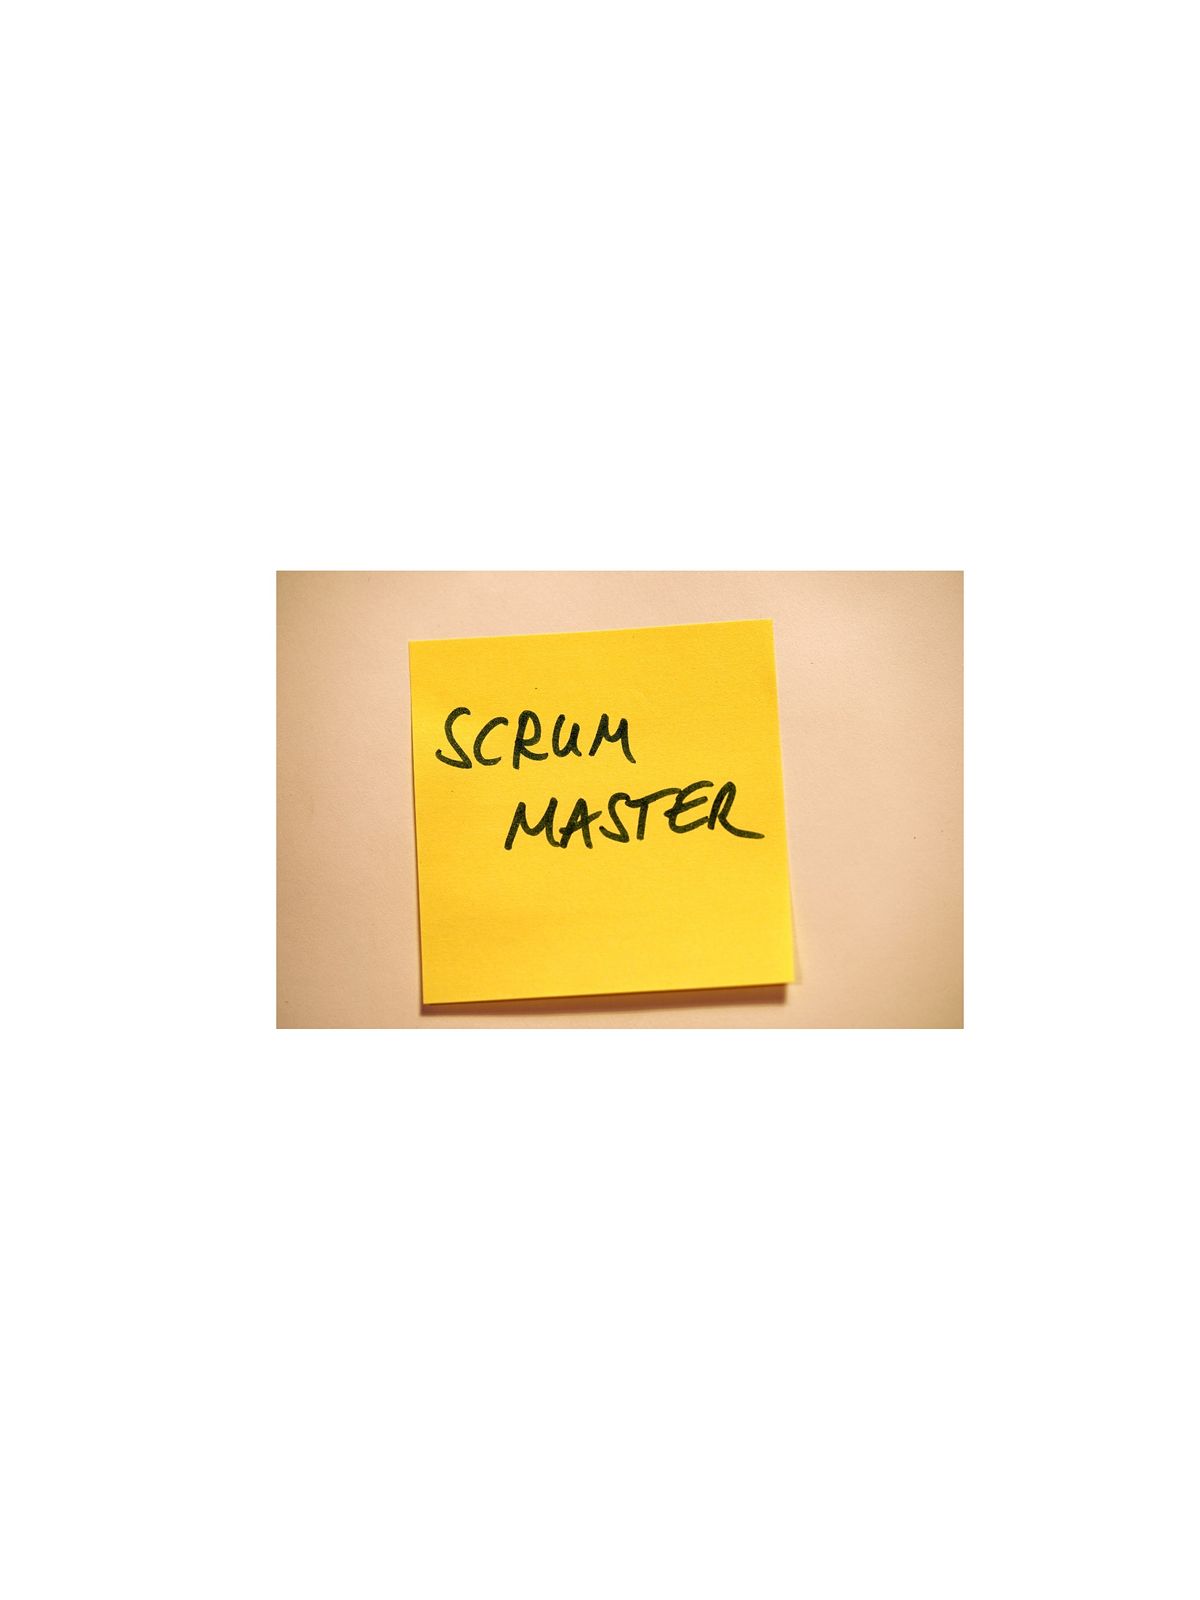 4 Weekends Only Scrum Master Training Course in Birmingham